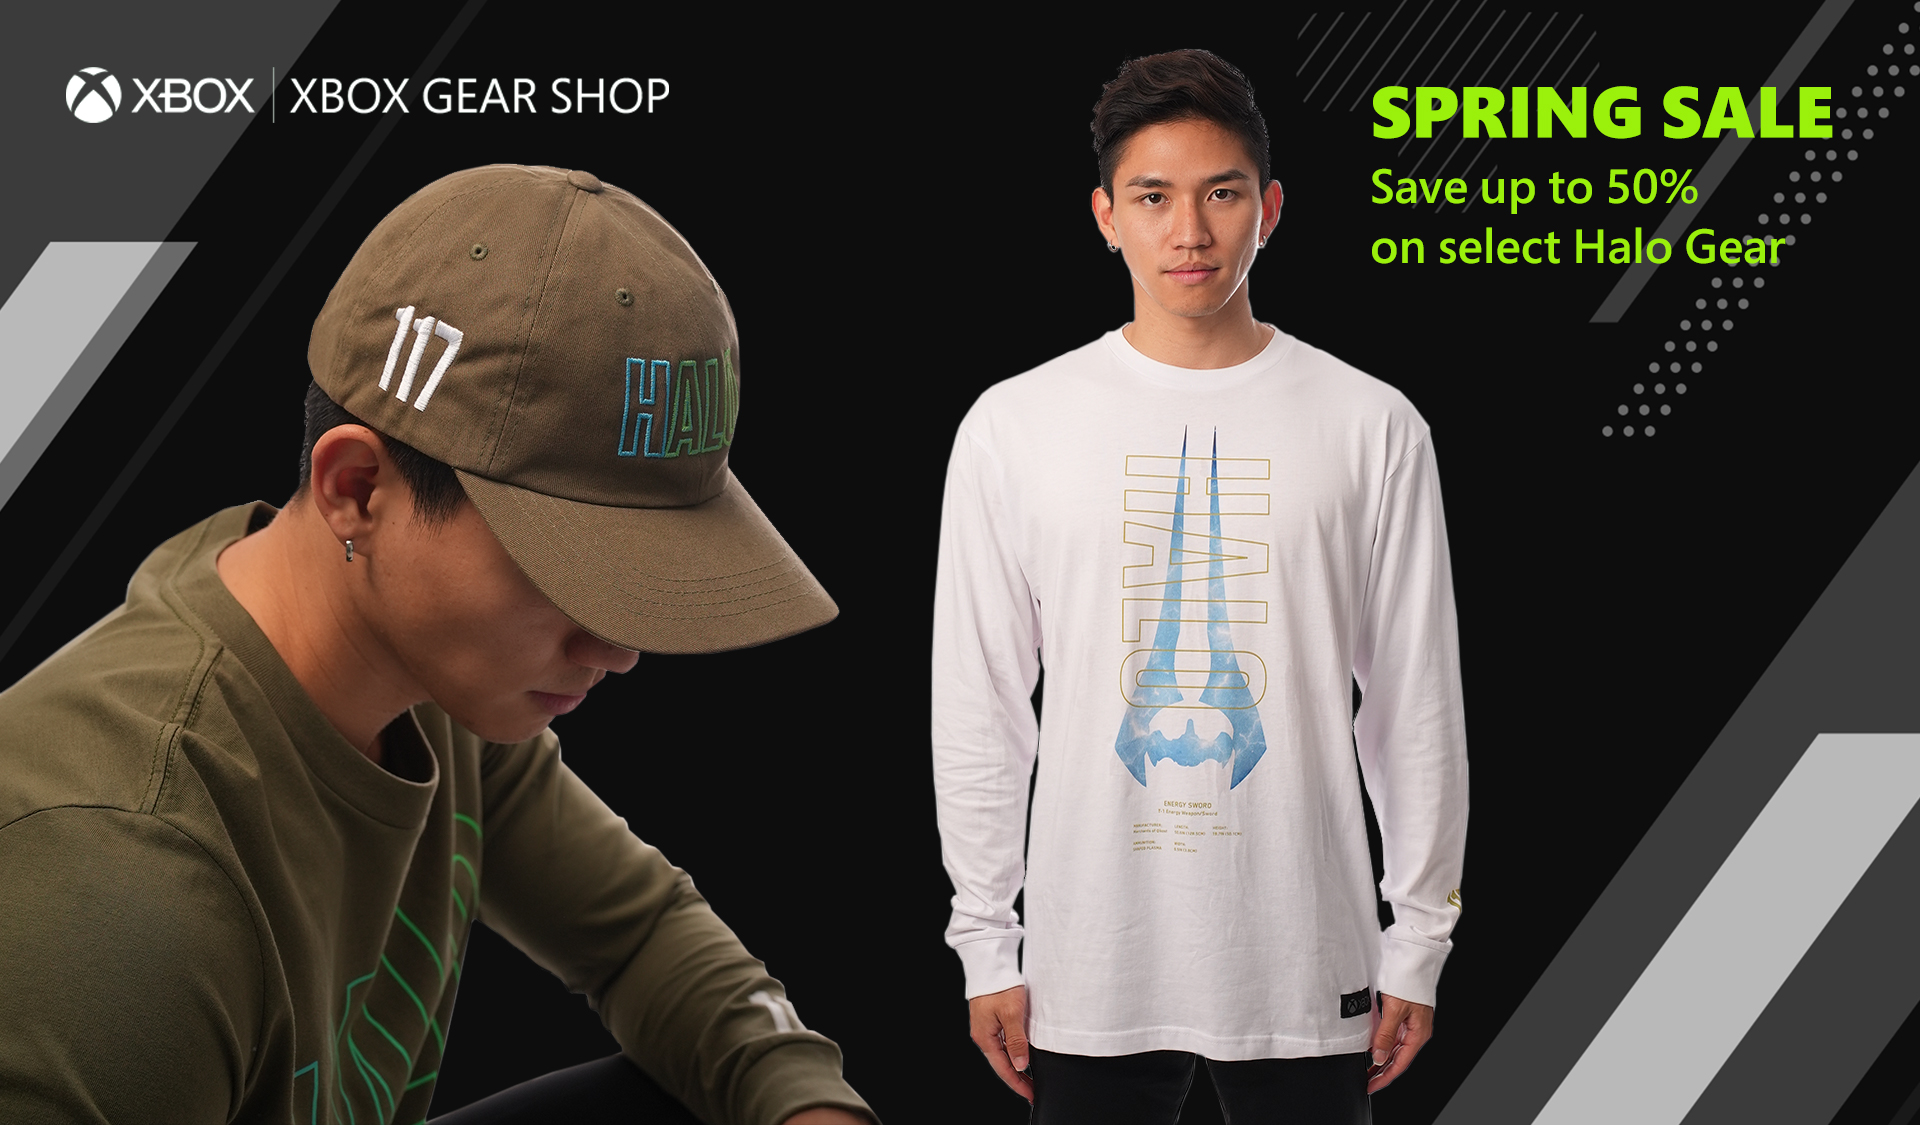 Xbox Gear Shop sale image - save up to 50% on select Halo gear.